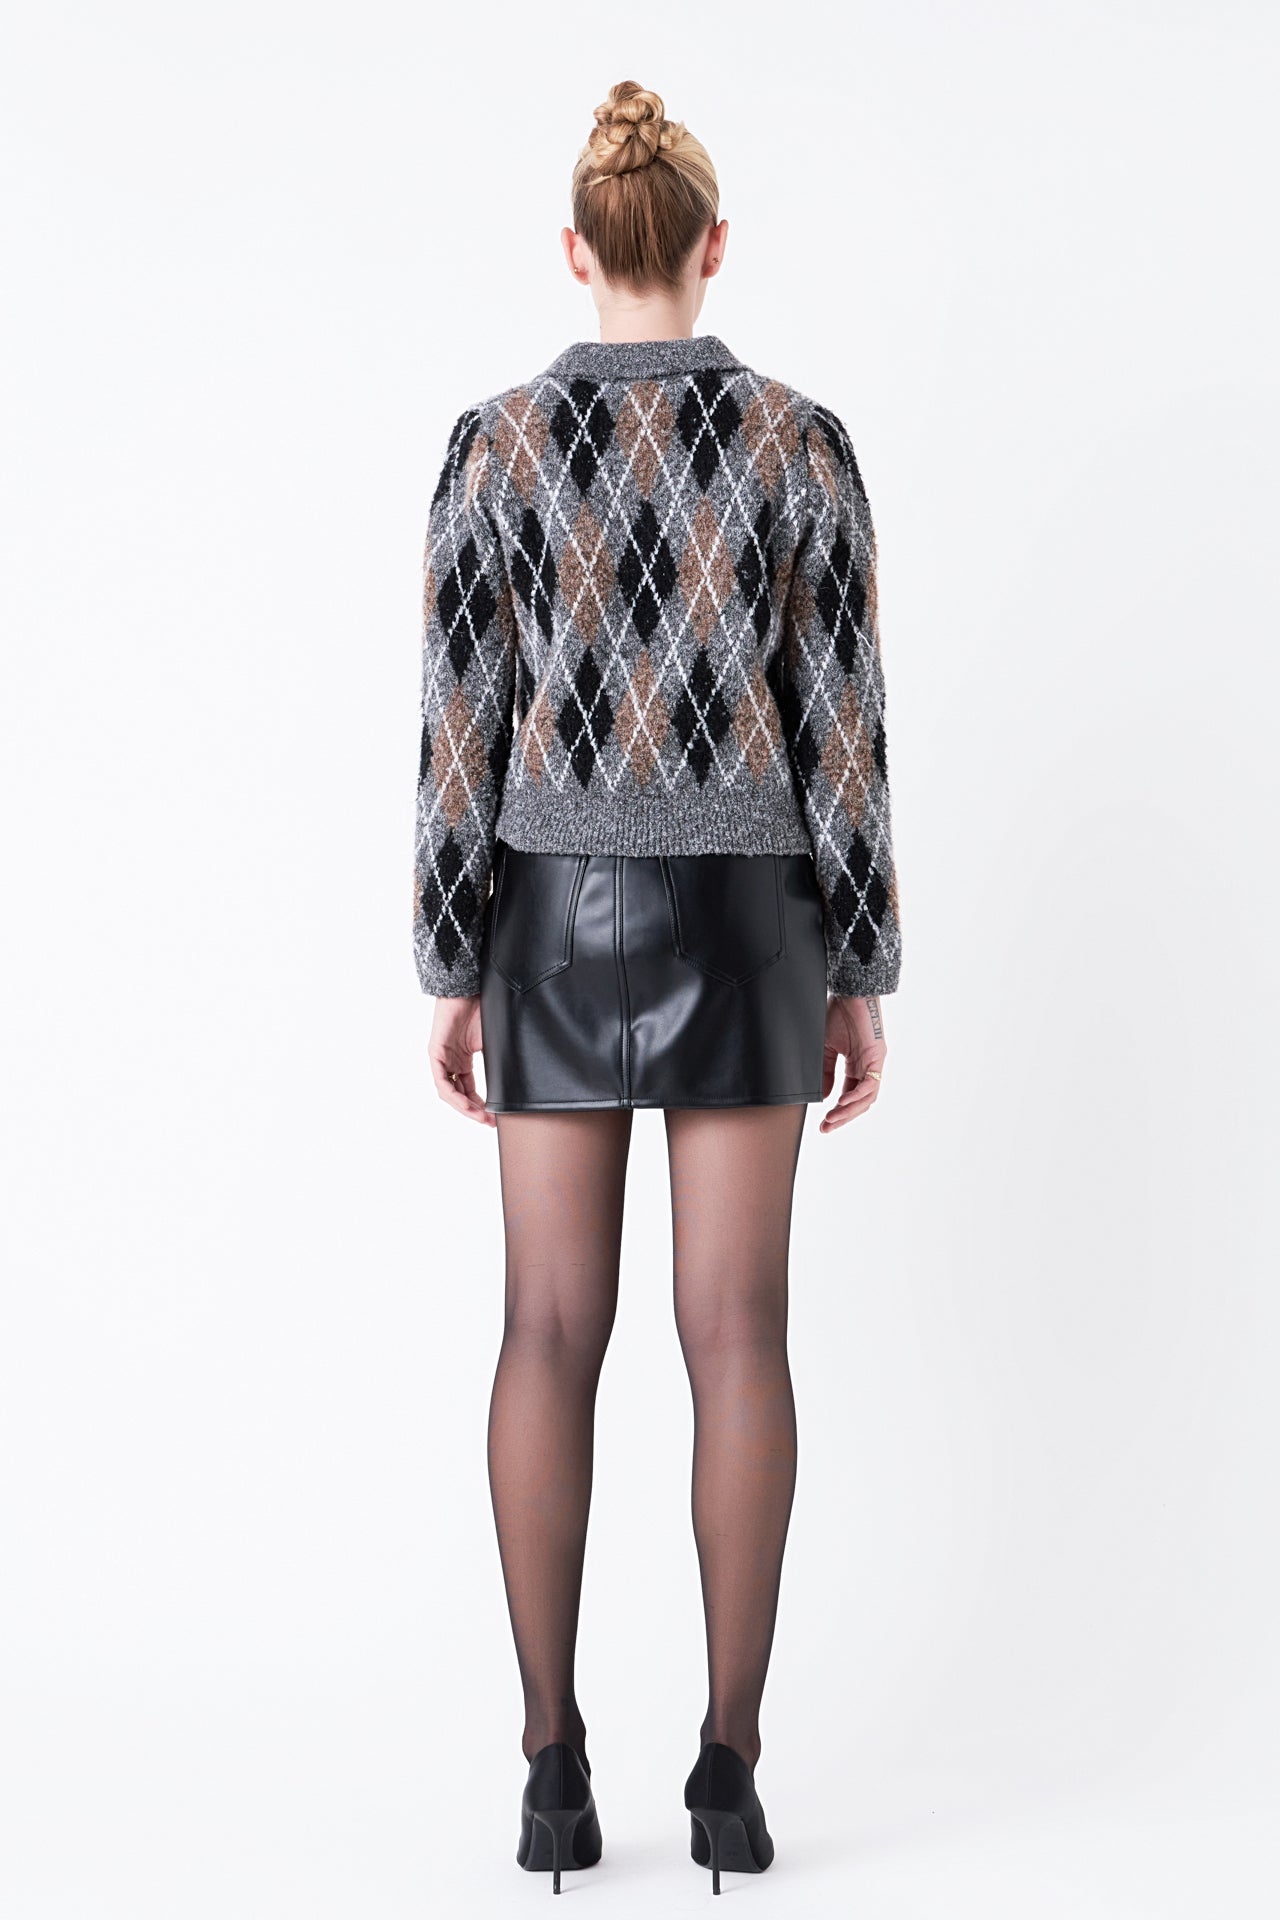 GREY LAB - Argyle Collared Sweater - SWEATERS & KNITS available at Objectrare